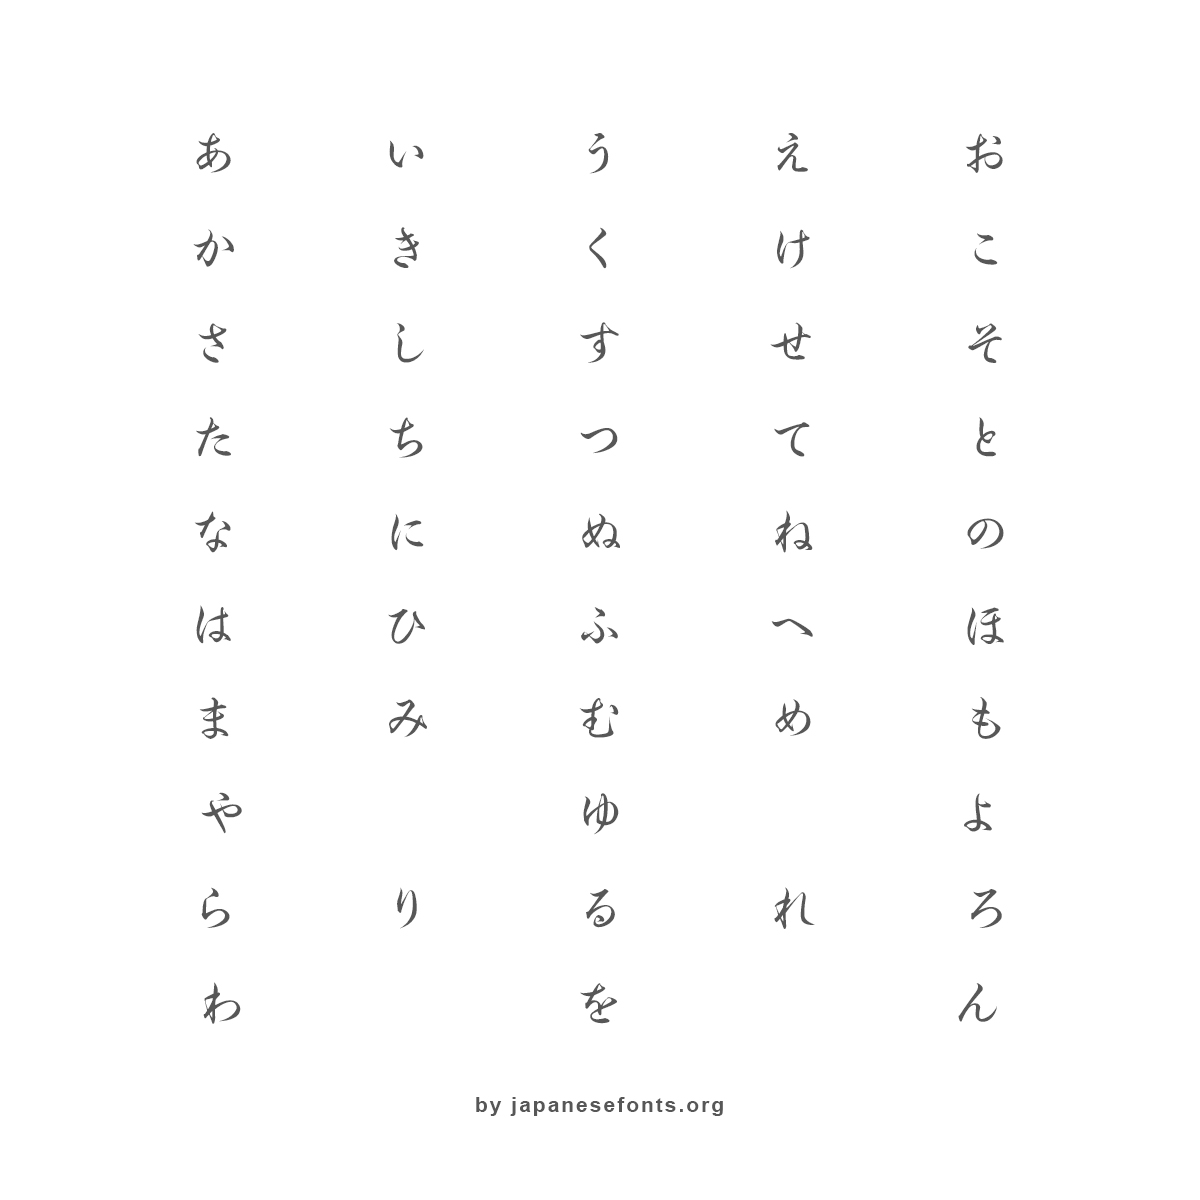 Download MS Gothic Font / Typeface - Free Japanese Fonts